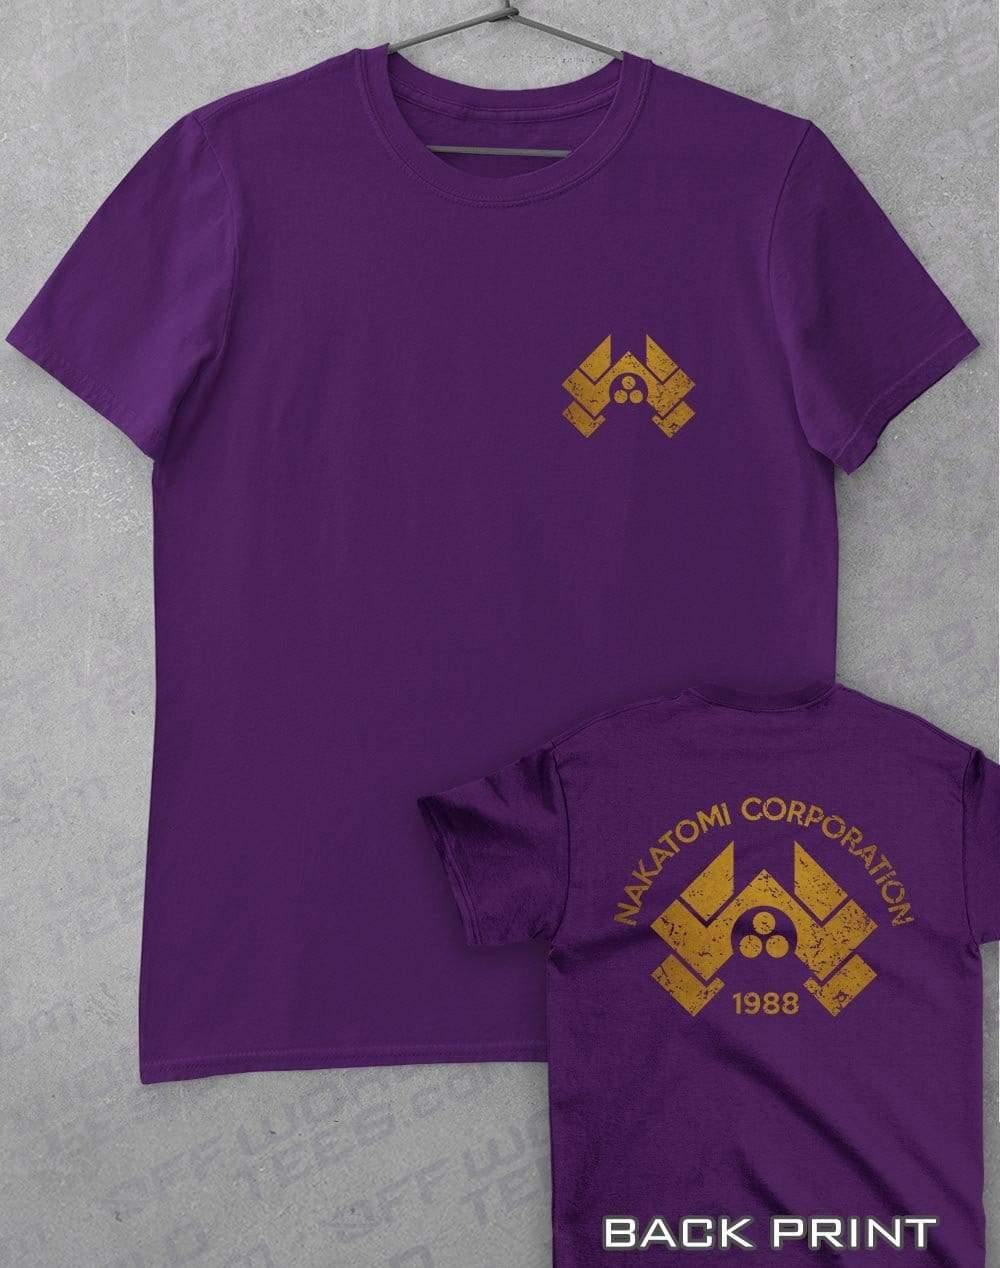 Nakatomi Corporation 1988 with Back Print T-Shirt S / Purple  - Off World Tees